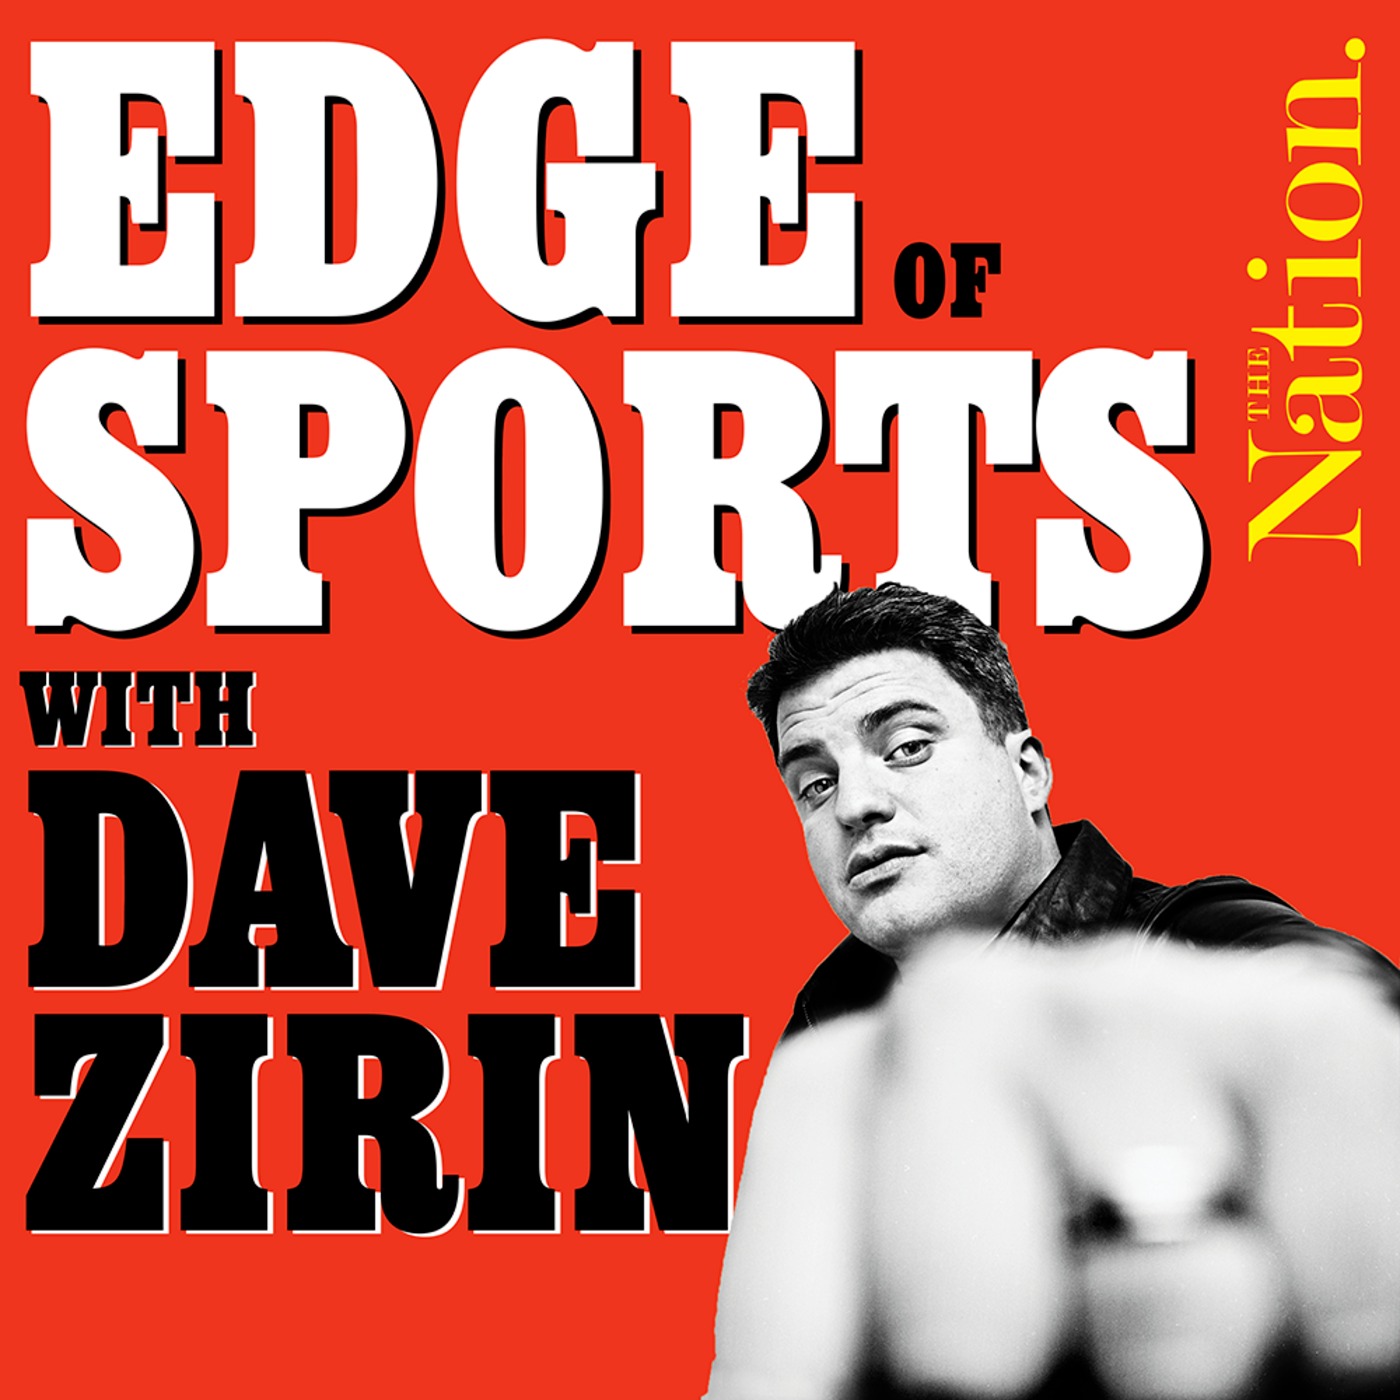 Edge of Sports: Why the NBA World Lost Its Joy